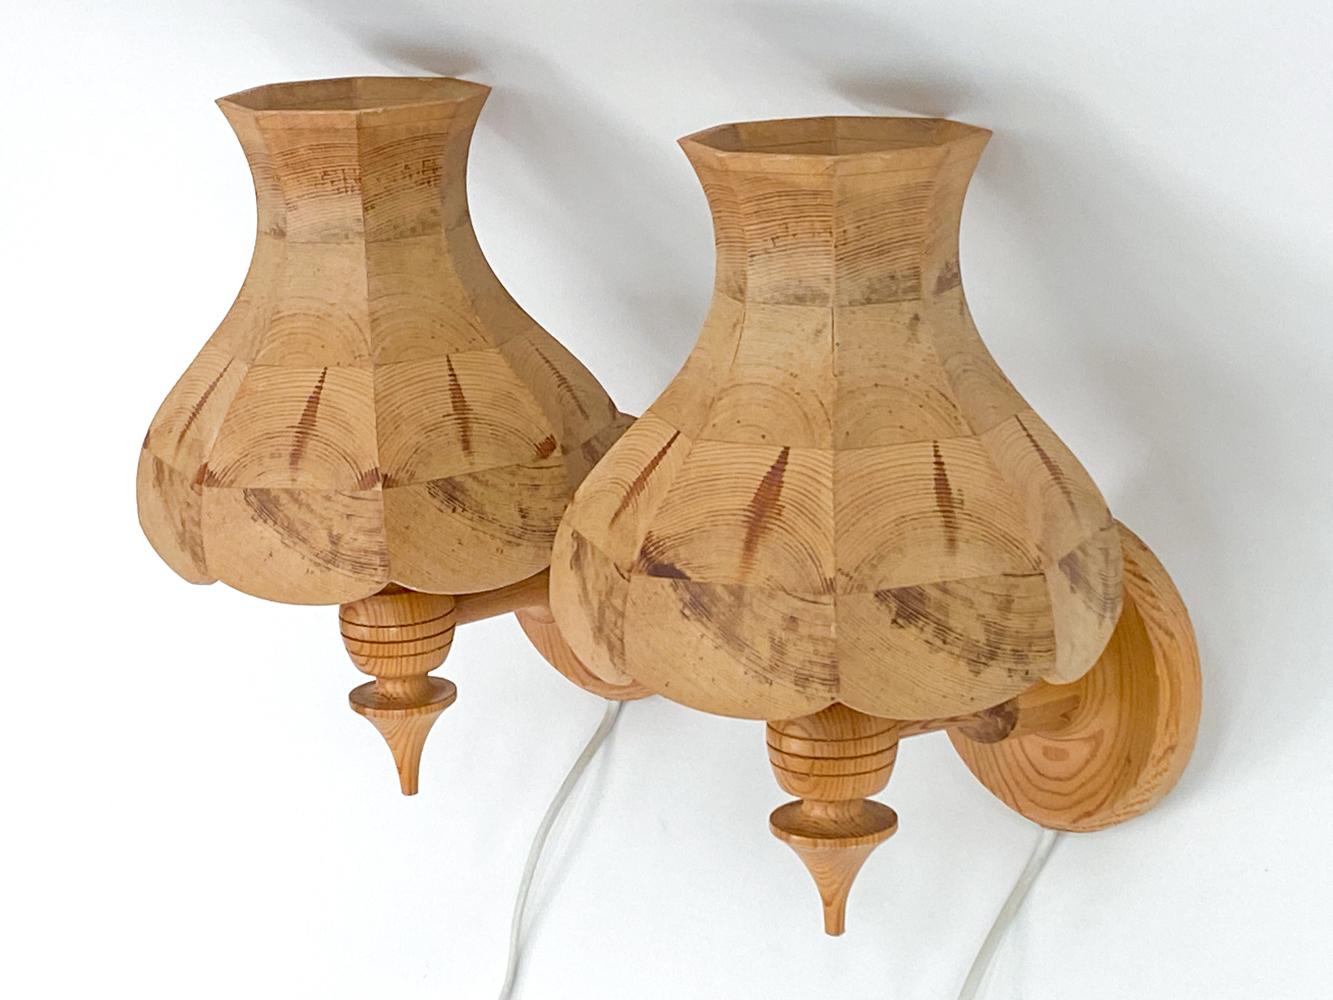 This fabulous pair of sconces brings the coziness of a Swedish cabin to your home! 
Crafted from solid pine, these lights bring organic texture and natural warmth to any space. The design is elevated by vase and ring turnings, which lend a